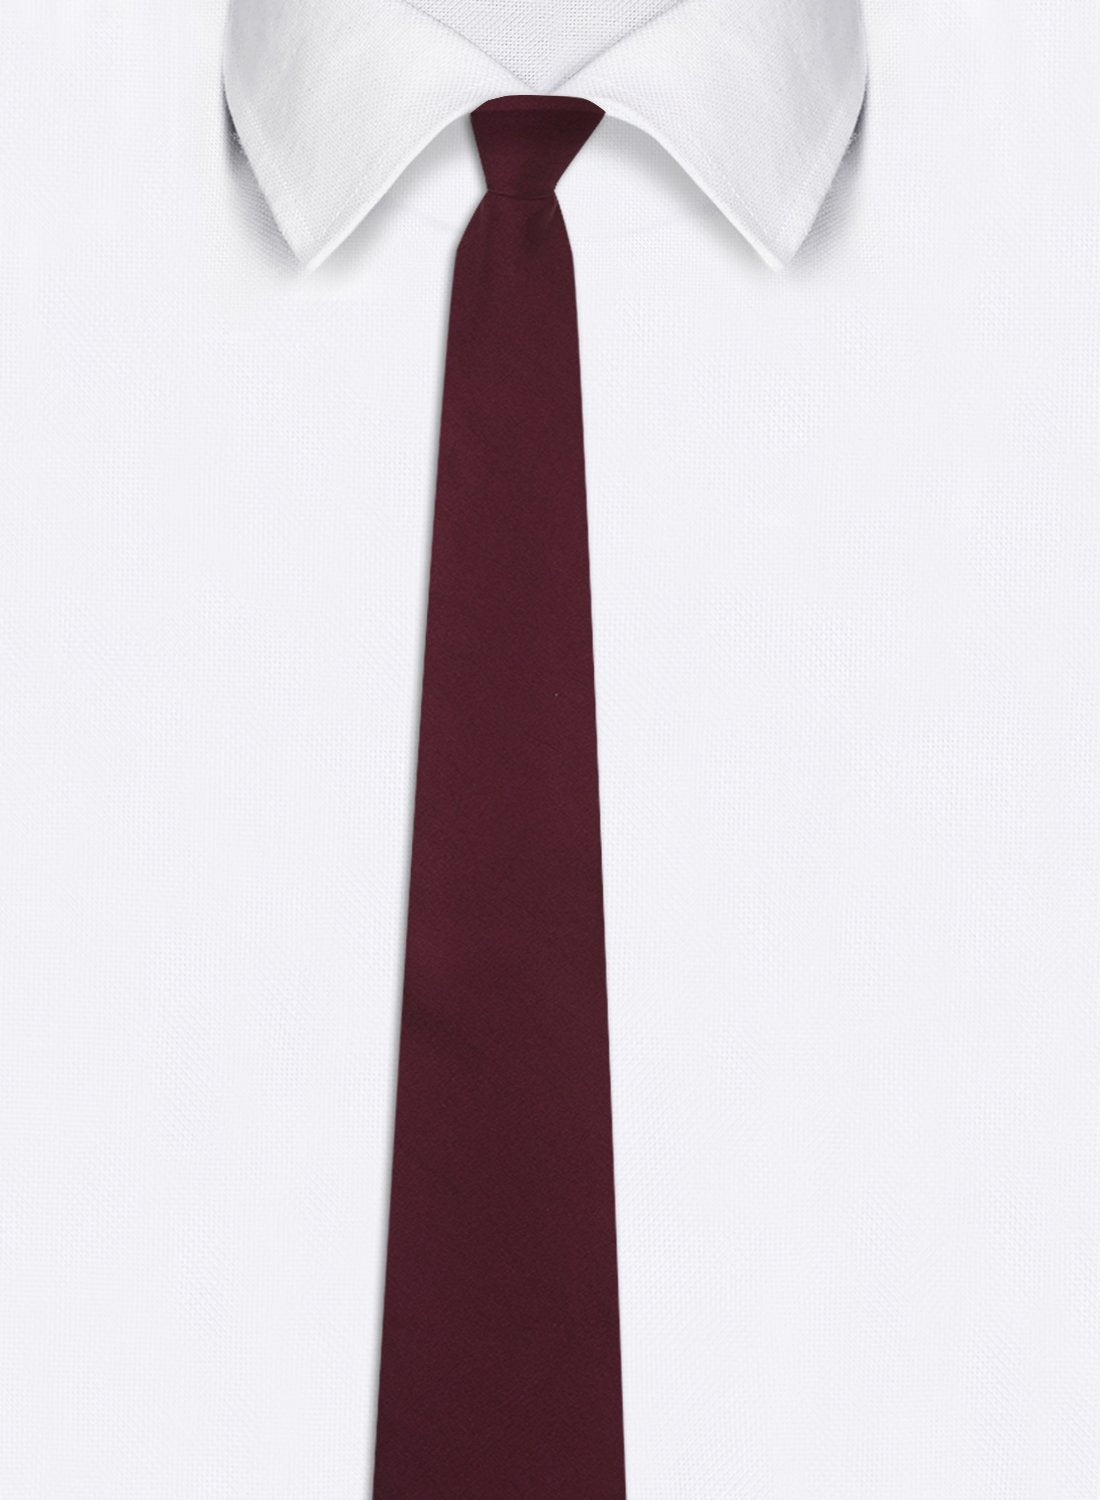 Chokore Special 3-in-1 Indian at Heart Gift Set, Burgundy (Pocket Square, Tie, & Cufflinks)